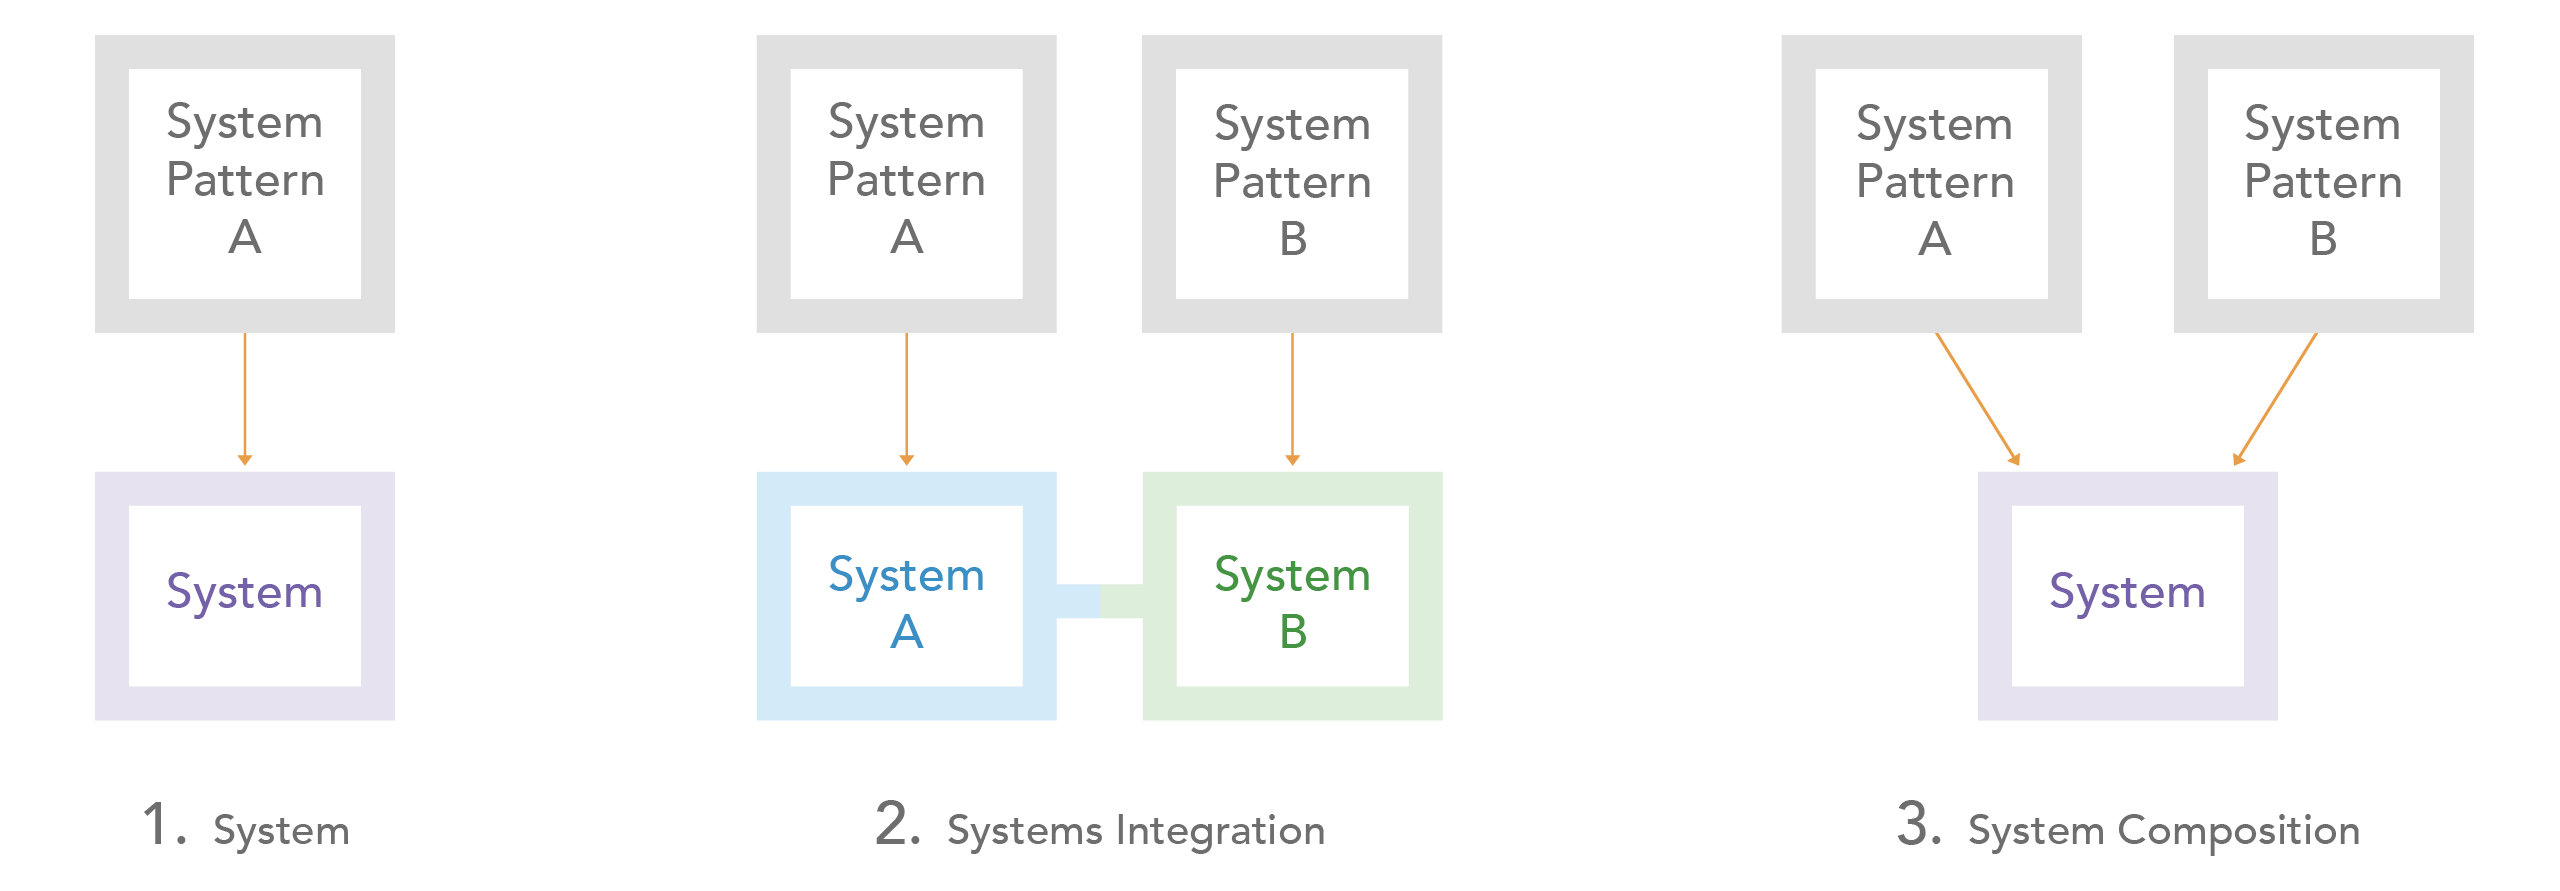 Working with multiple system patterns